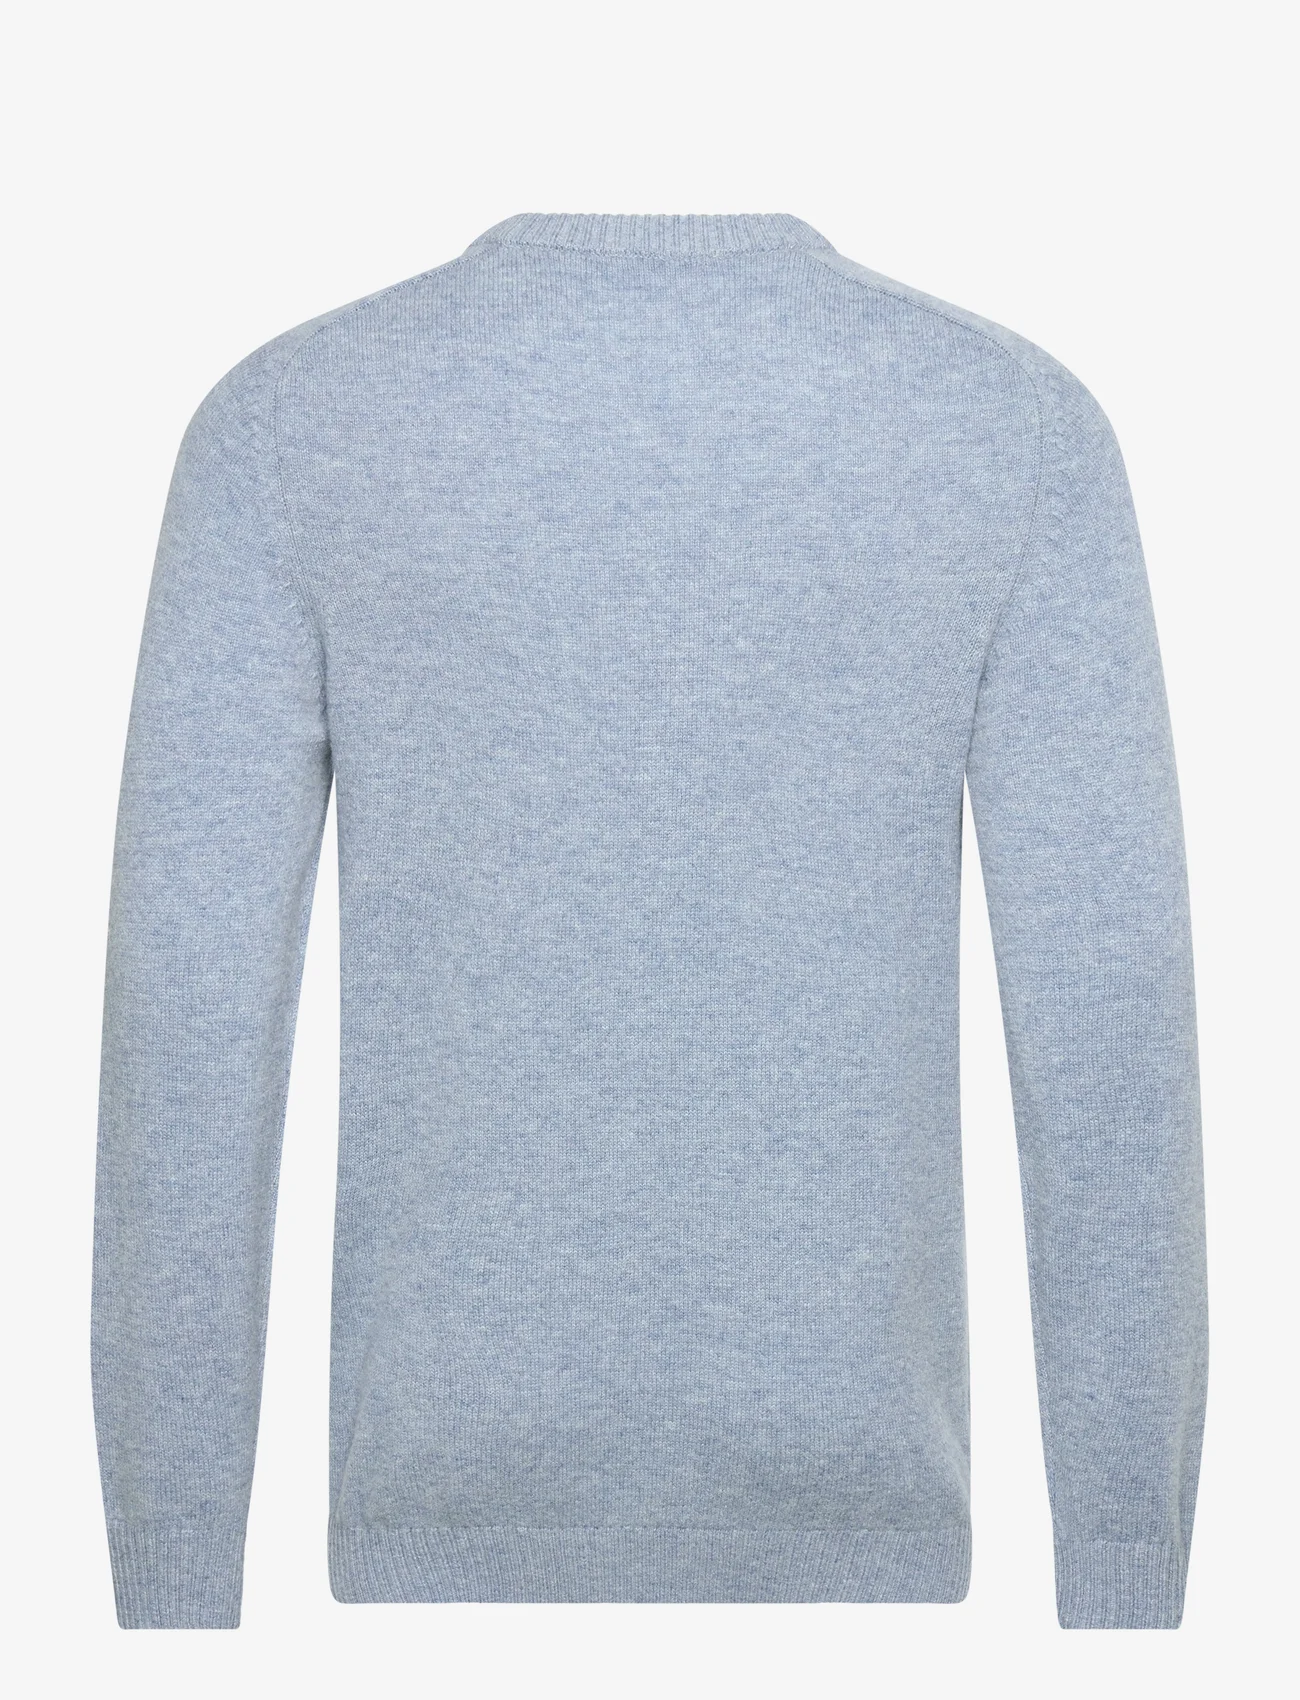 Selected Homme - SLHNEWCOBAN LAMBS WOOL CREW NECK W NOOS - perusneuleet - light blue - 1